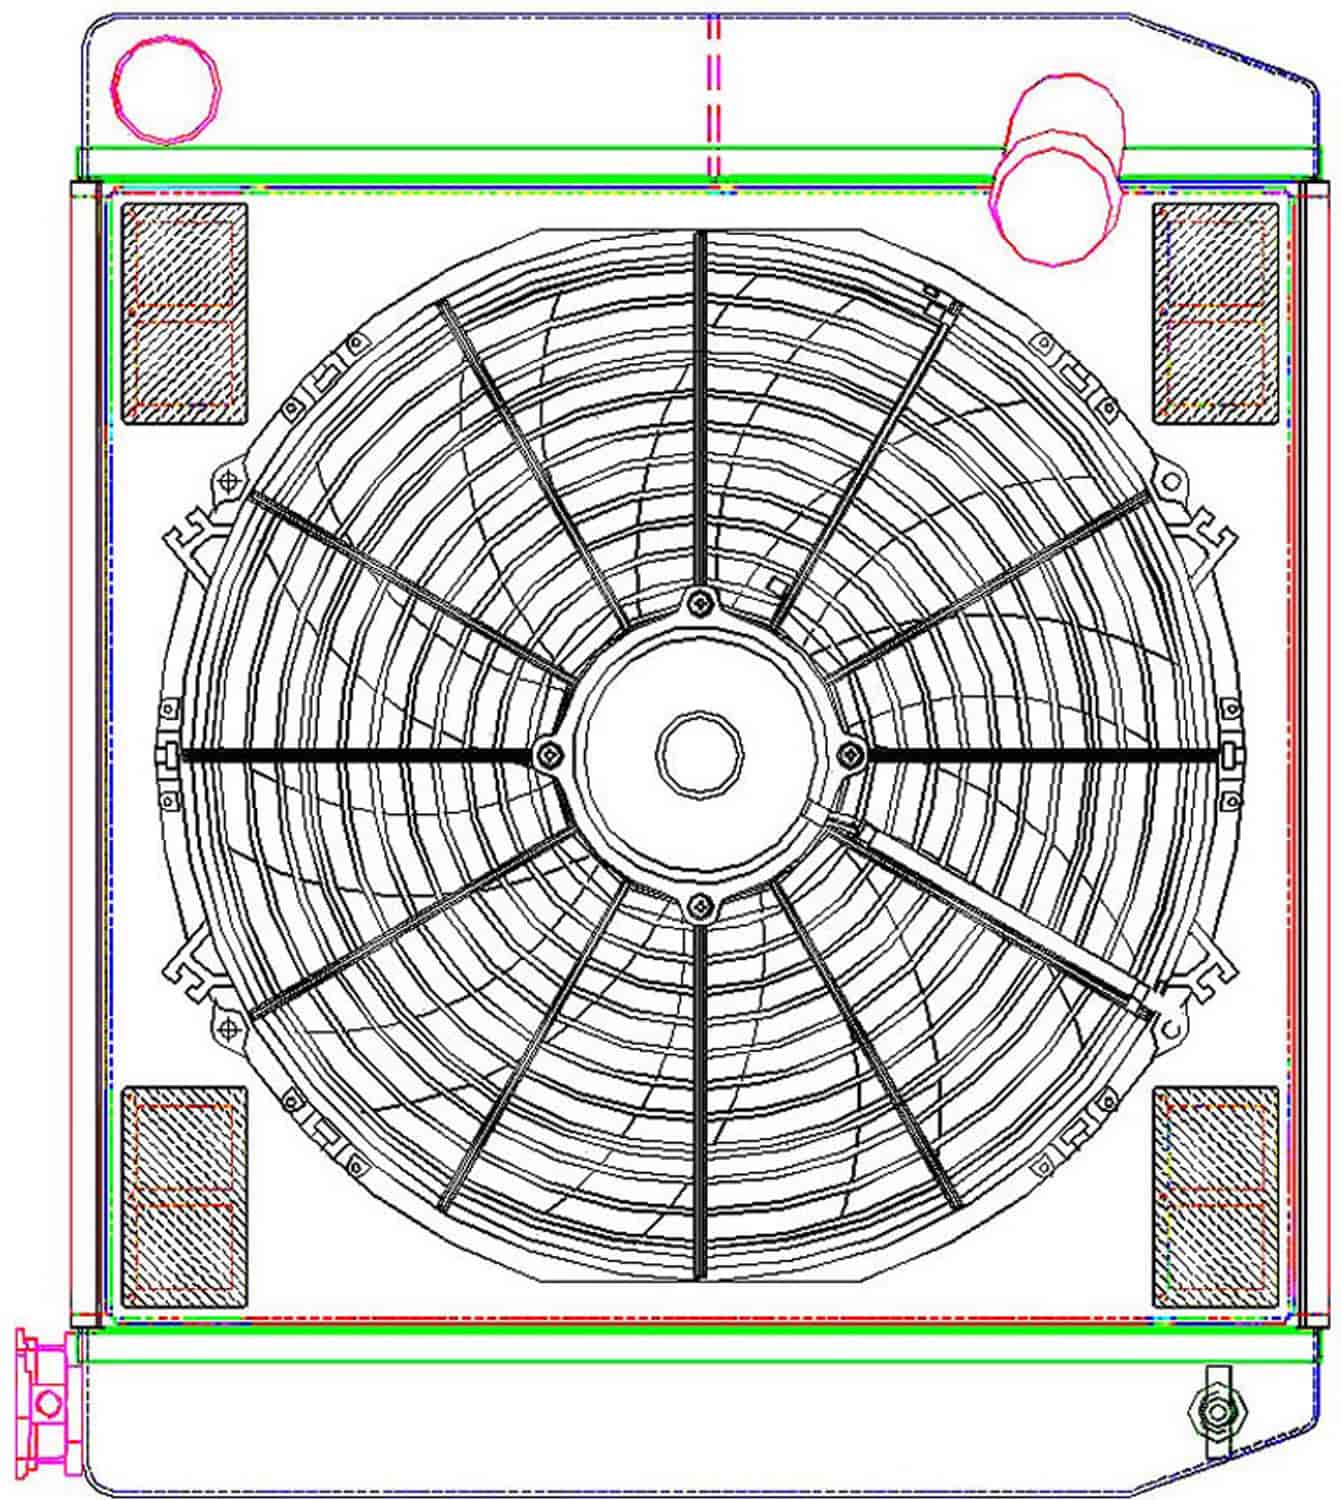 MegaCool ComboUnit Universal Fit Radiator and Fan Dual Pass Crossflow Design 22" x 19" with No Options